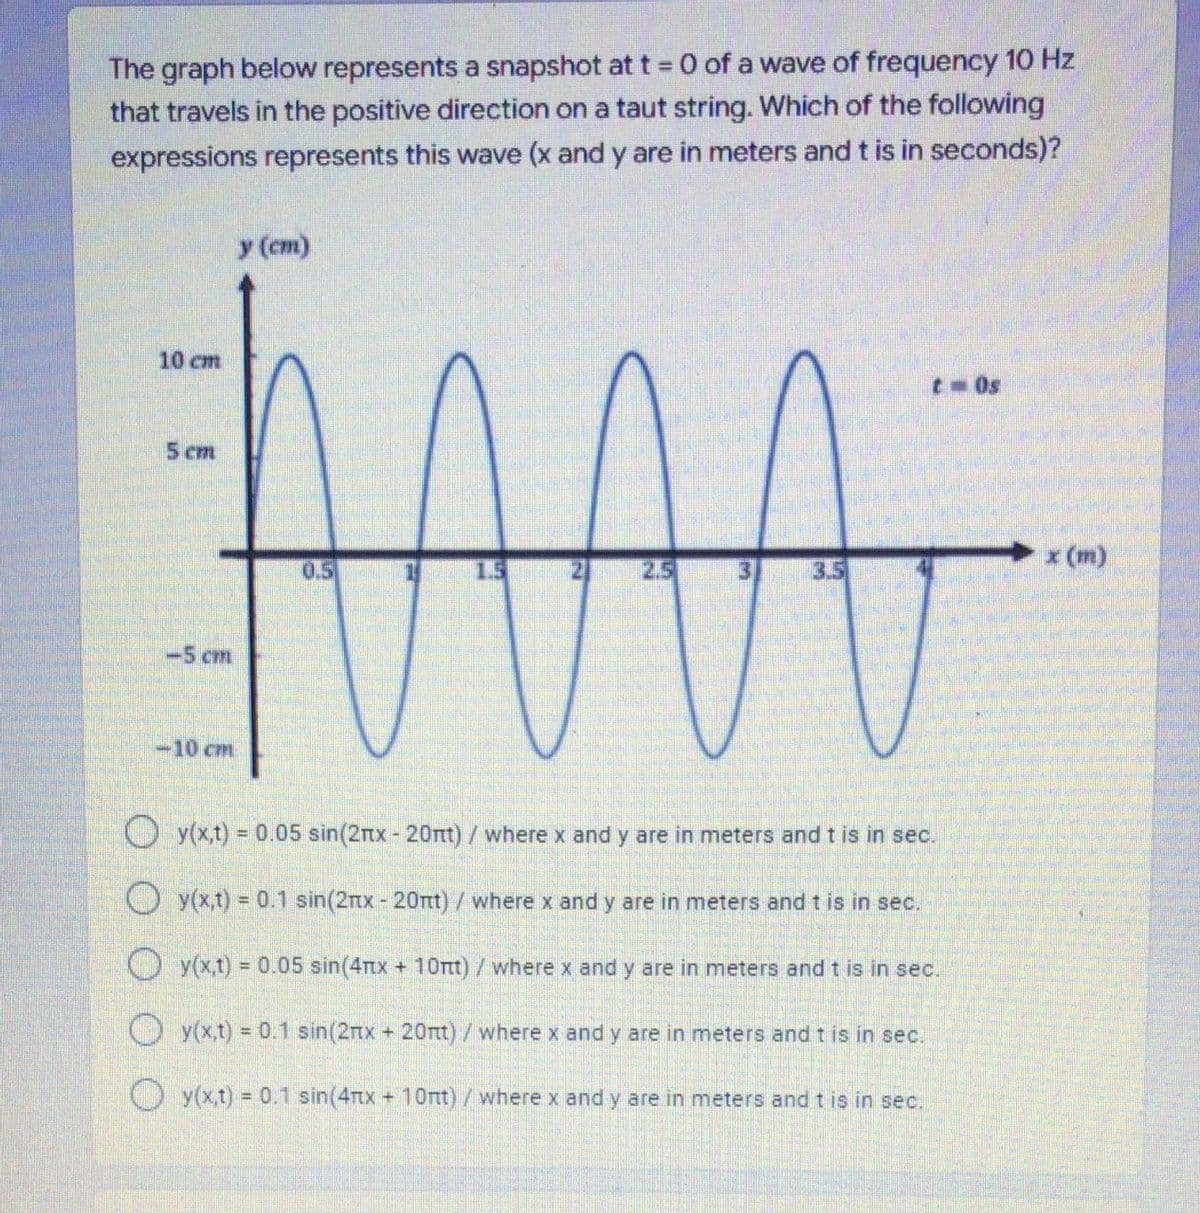 The graph below represents a snapshot at t = 0 of a wave of frequency 10 Hz
that travels in the positive direction on a taut string. Which of the following
expressions represents this wave (x and y are in meters and t is in seconds)?
y (cm)
10 cm
t 0s
5 ст
x (m)
05
1.5
2.5
3.
3.5
-5 cm
-10 cm
O y(xt) = 0.05 sin(2nx- 20nt)/where x and y are in meters and t is in sec.
O y(x,t) = 0.1 sin(2rtx - 20rtt)/where x and y are in meters and t is in sec.
O y(x,t) = 0.05 sin(4rtx + 10rtt)/where x and y are in meters and t is in sec.
%3D
O y(x,t) = 0.1 sin(2nx + 20nt)/where x and y are in meters and t is in sec.
O y(x,t) 0.1 sin(4rtx + 1Ott) /where x and y are in meters and t is in sec.
